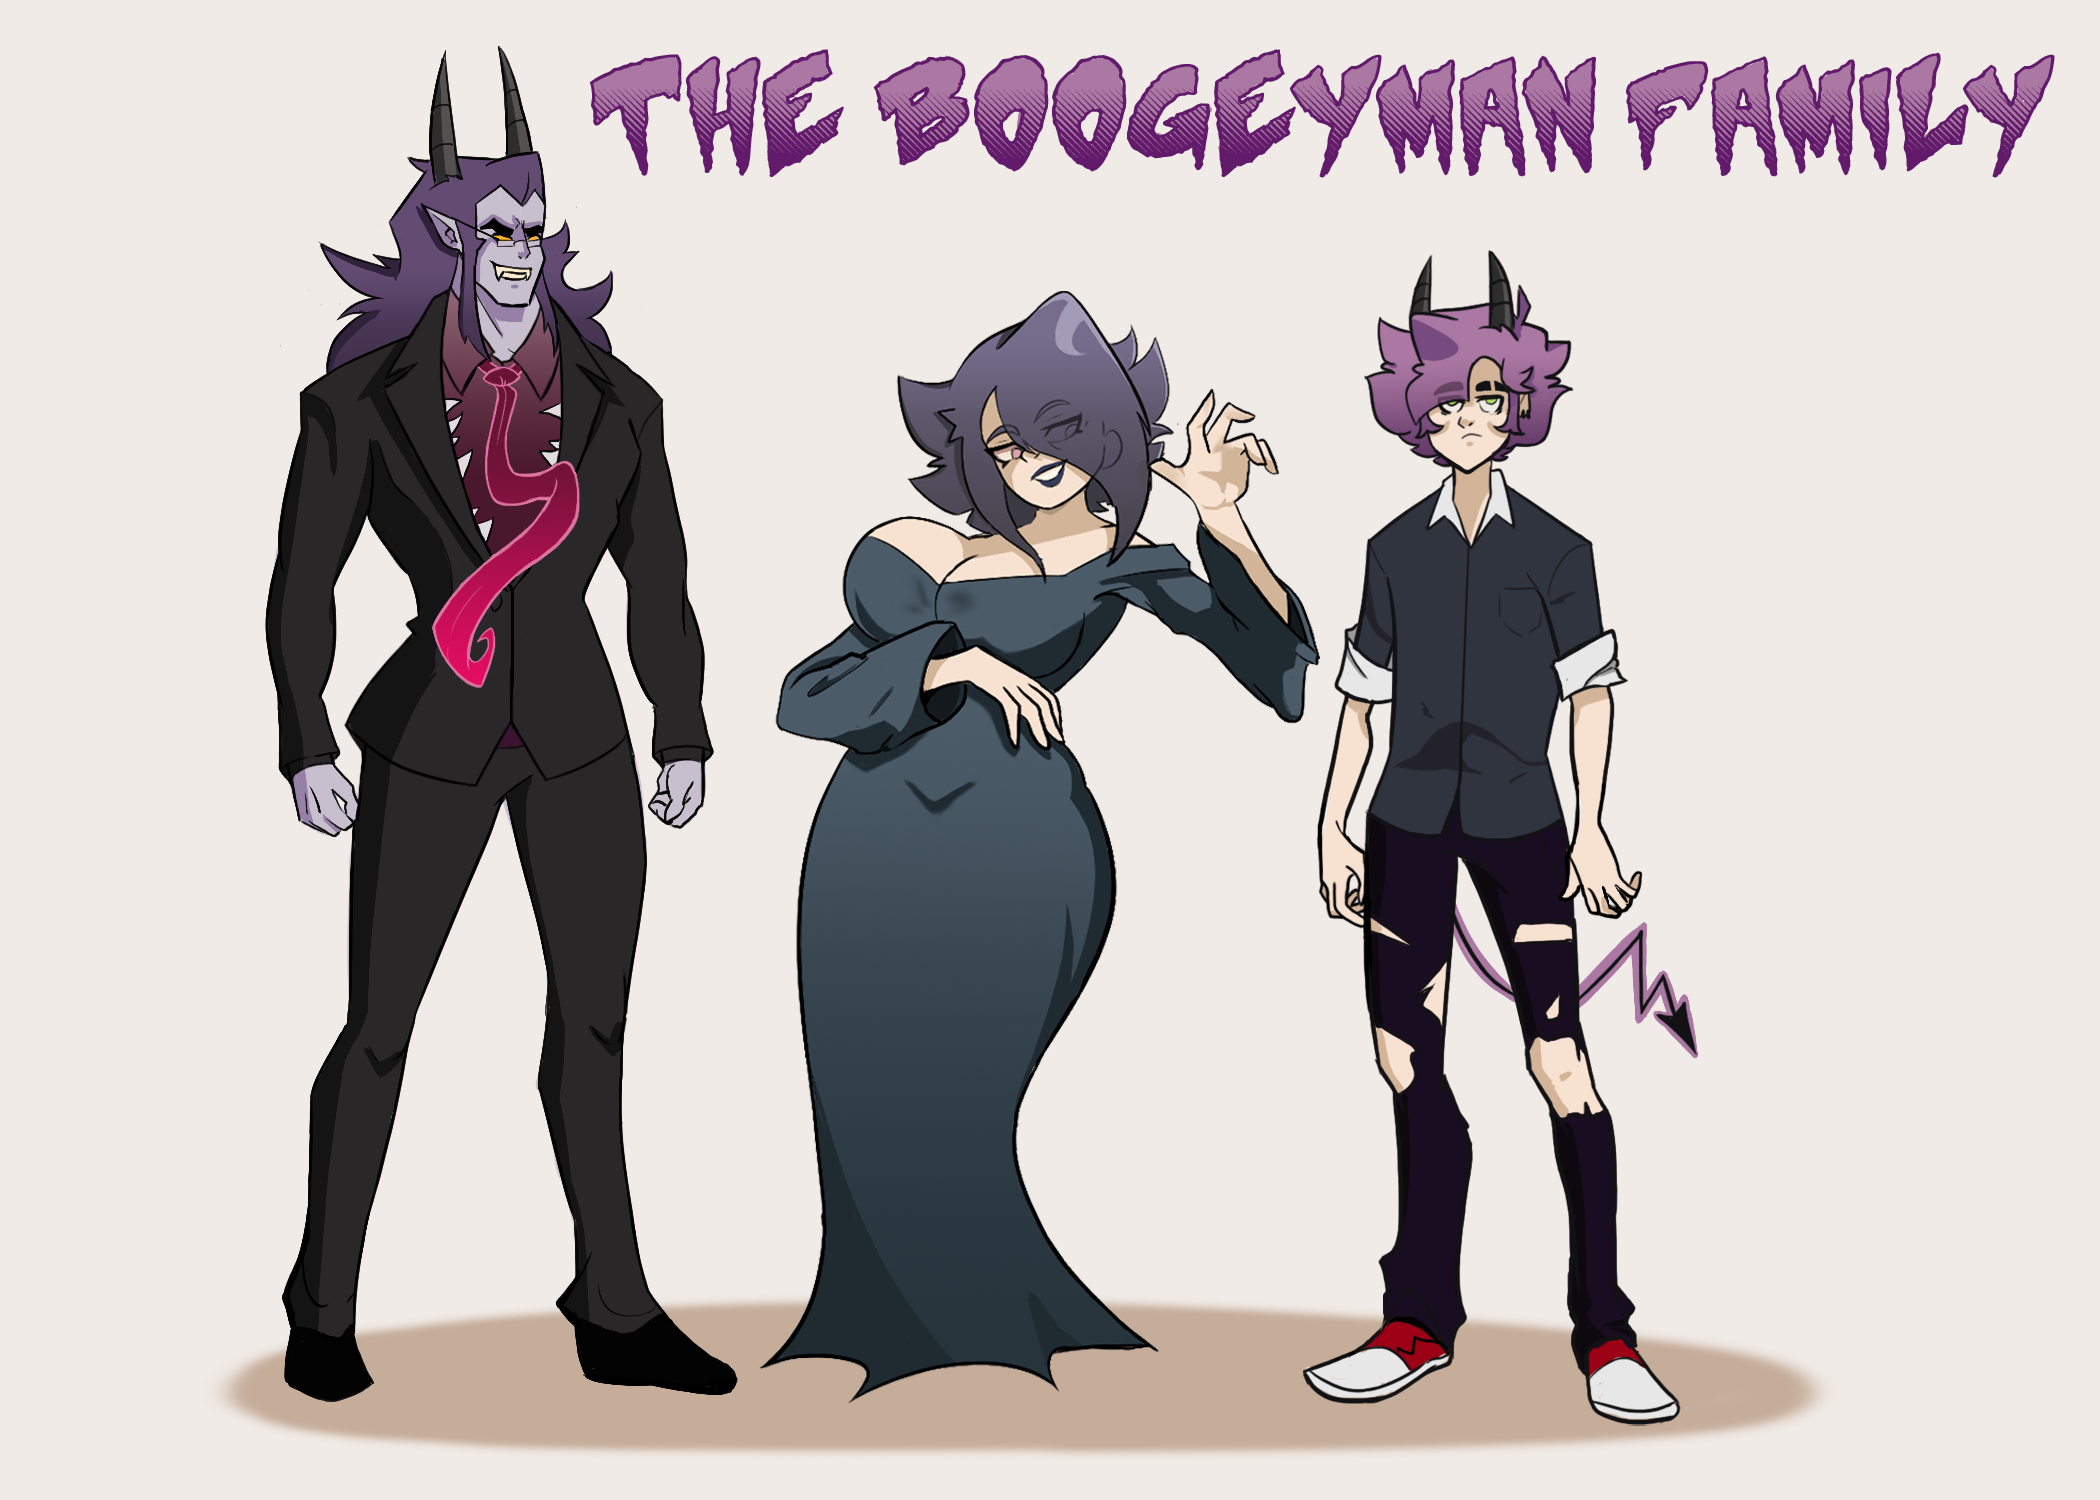  / EXAMPLE: Still of characters Boog and his parents. The Boogeyman (on the left) is retired and now protests against monster's killing humans. Julia, Boog's mom (on the right) is a human who fell in love with the Boogeyman.